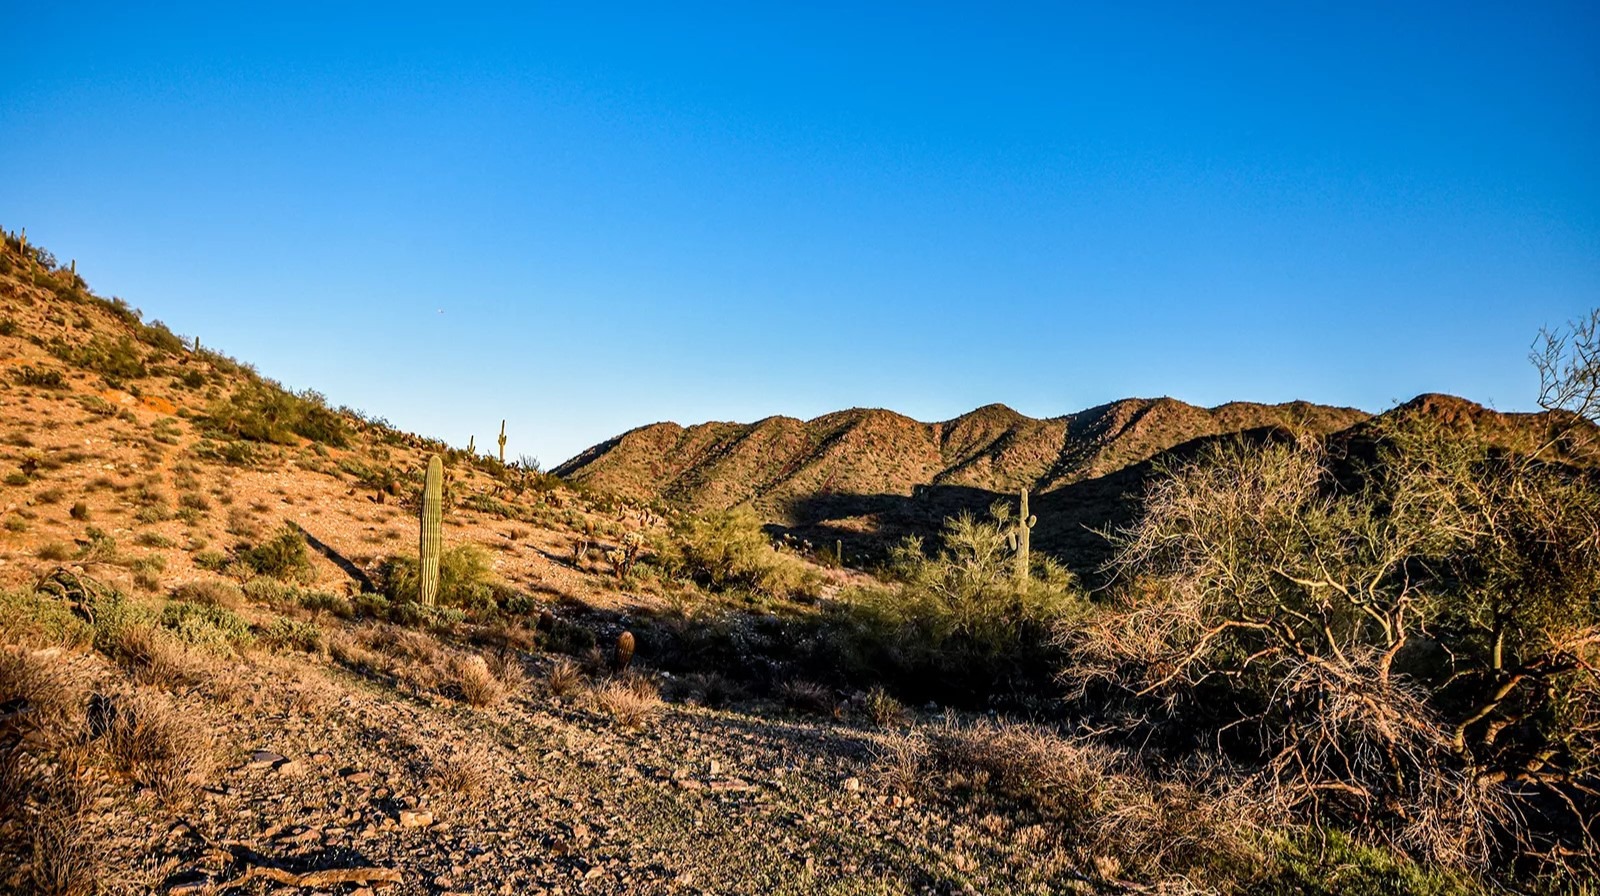 A desert landscape with sparse vegetation, cacti, and a range of hills in the Phoenix Mountain Preserve under a clear blue sky.